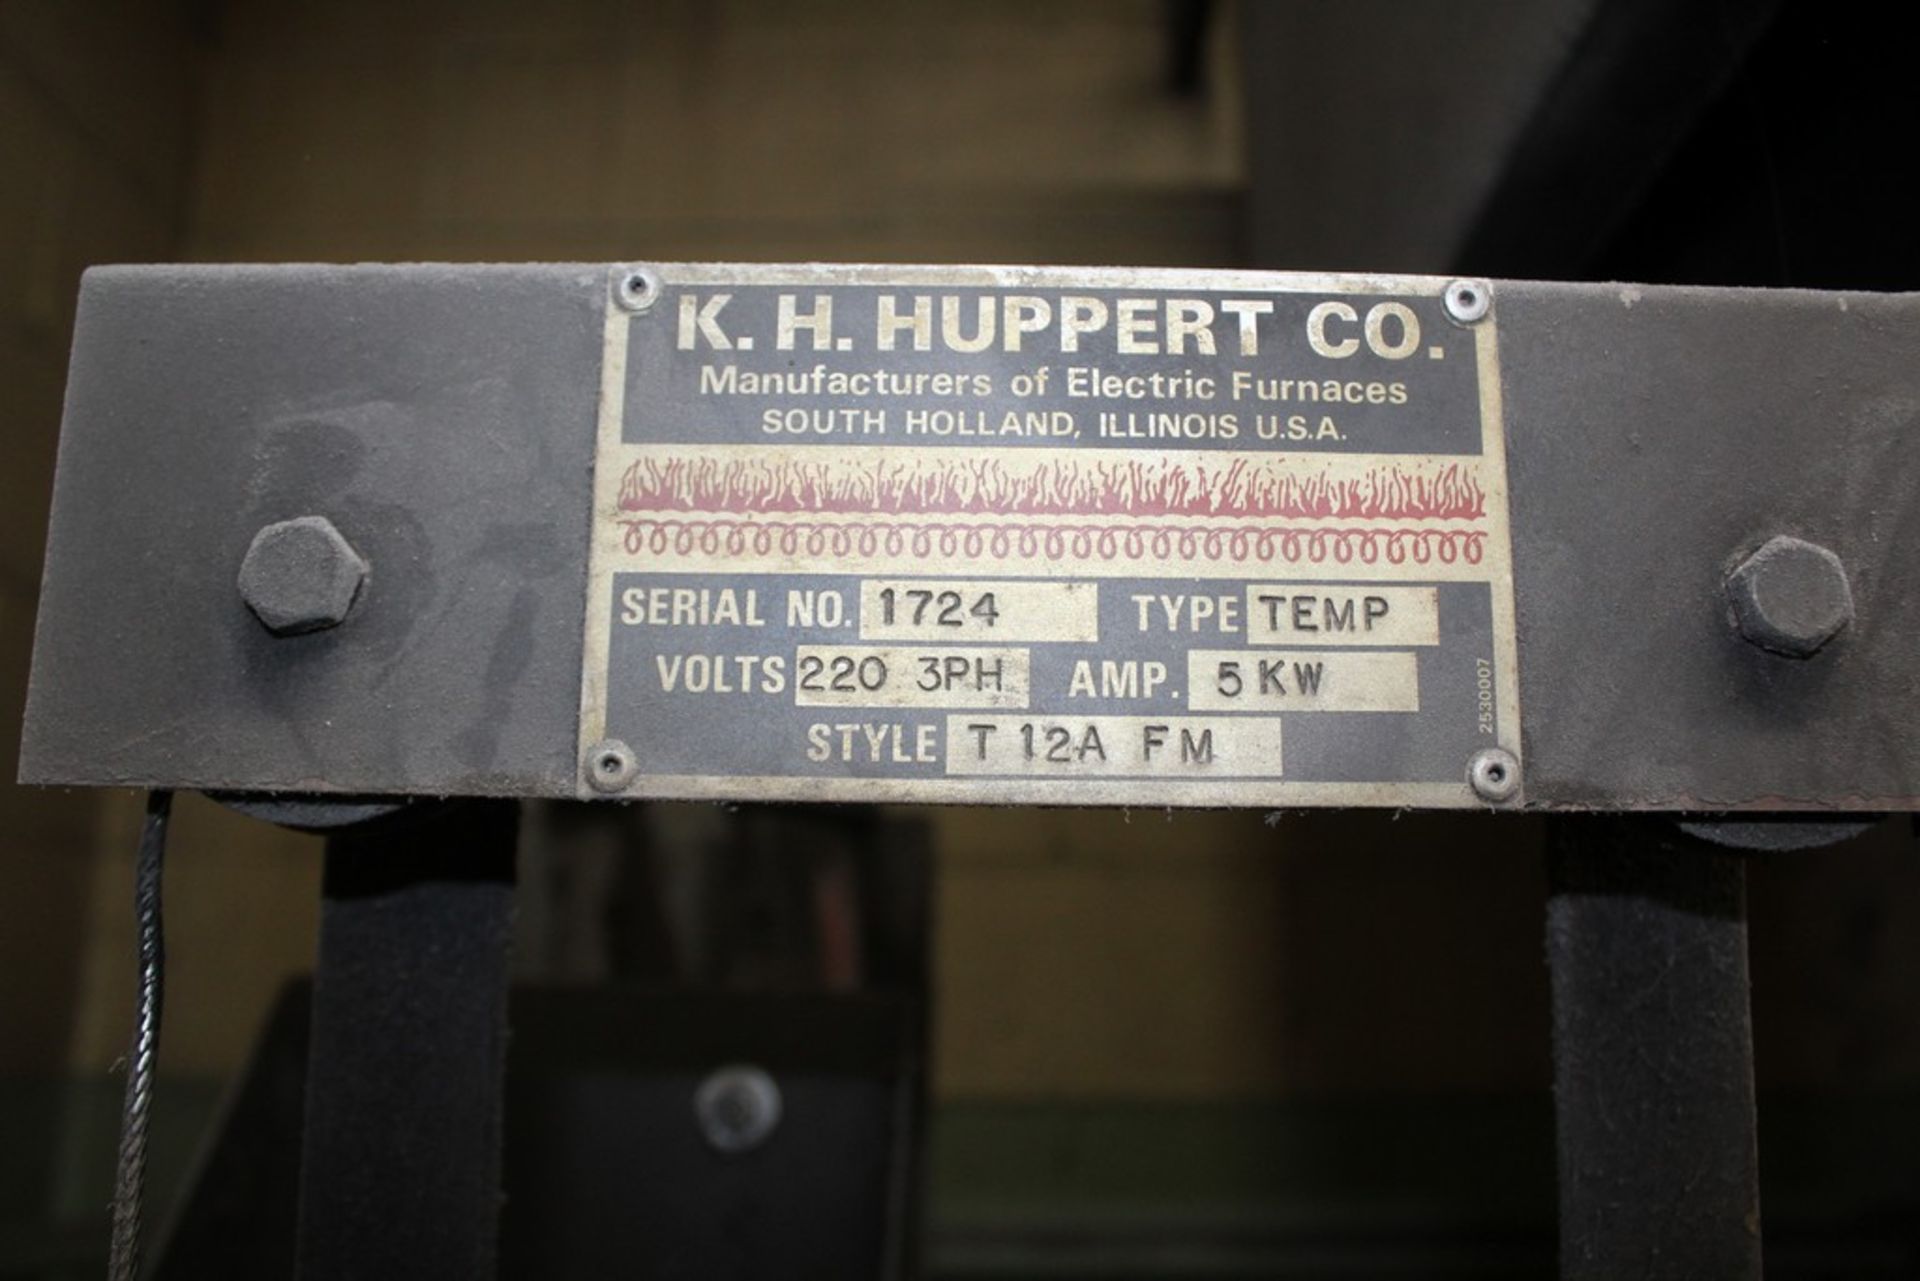 K.H. HUPPERT 5 KW MODEL T12A-FM ELECTRIC FURNACE, S/N 1724 - Image 2 of 3